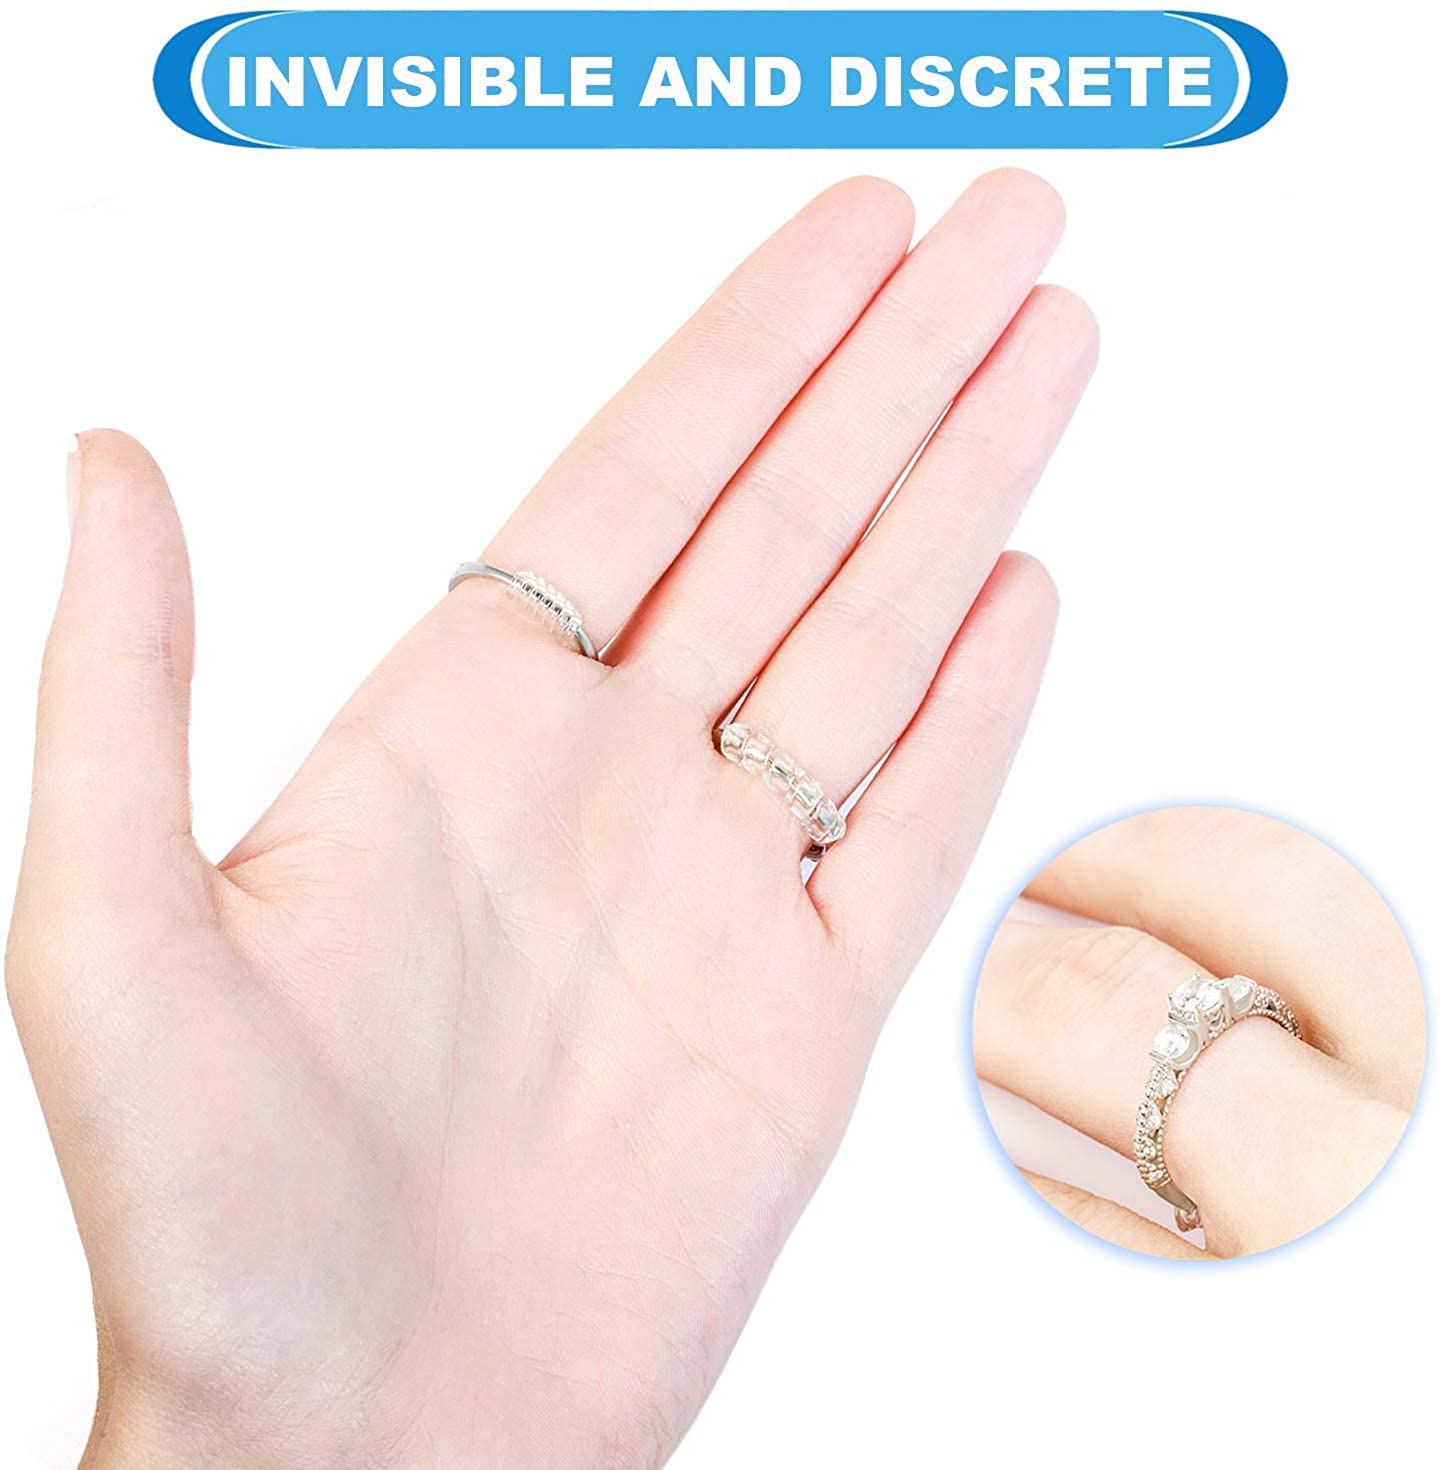 Men's and Women's Ring Adjuster for Loose Rings, Invisible Spiral Ring, Reusable Ring Size Adjuster - Fits Almost Any Rings (4 models)